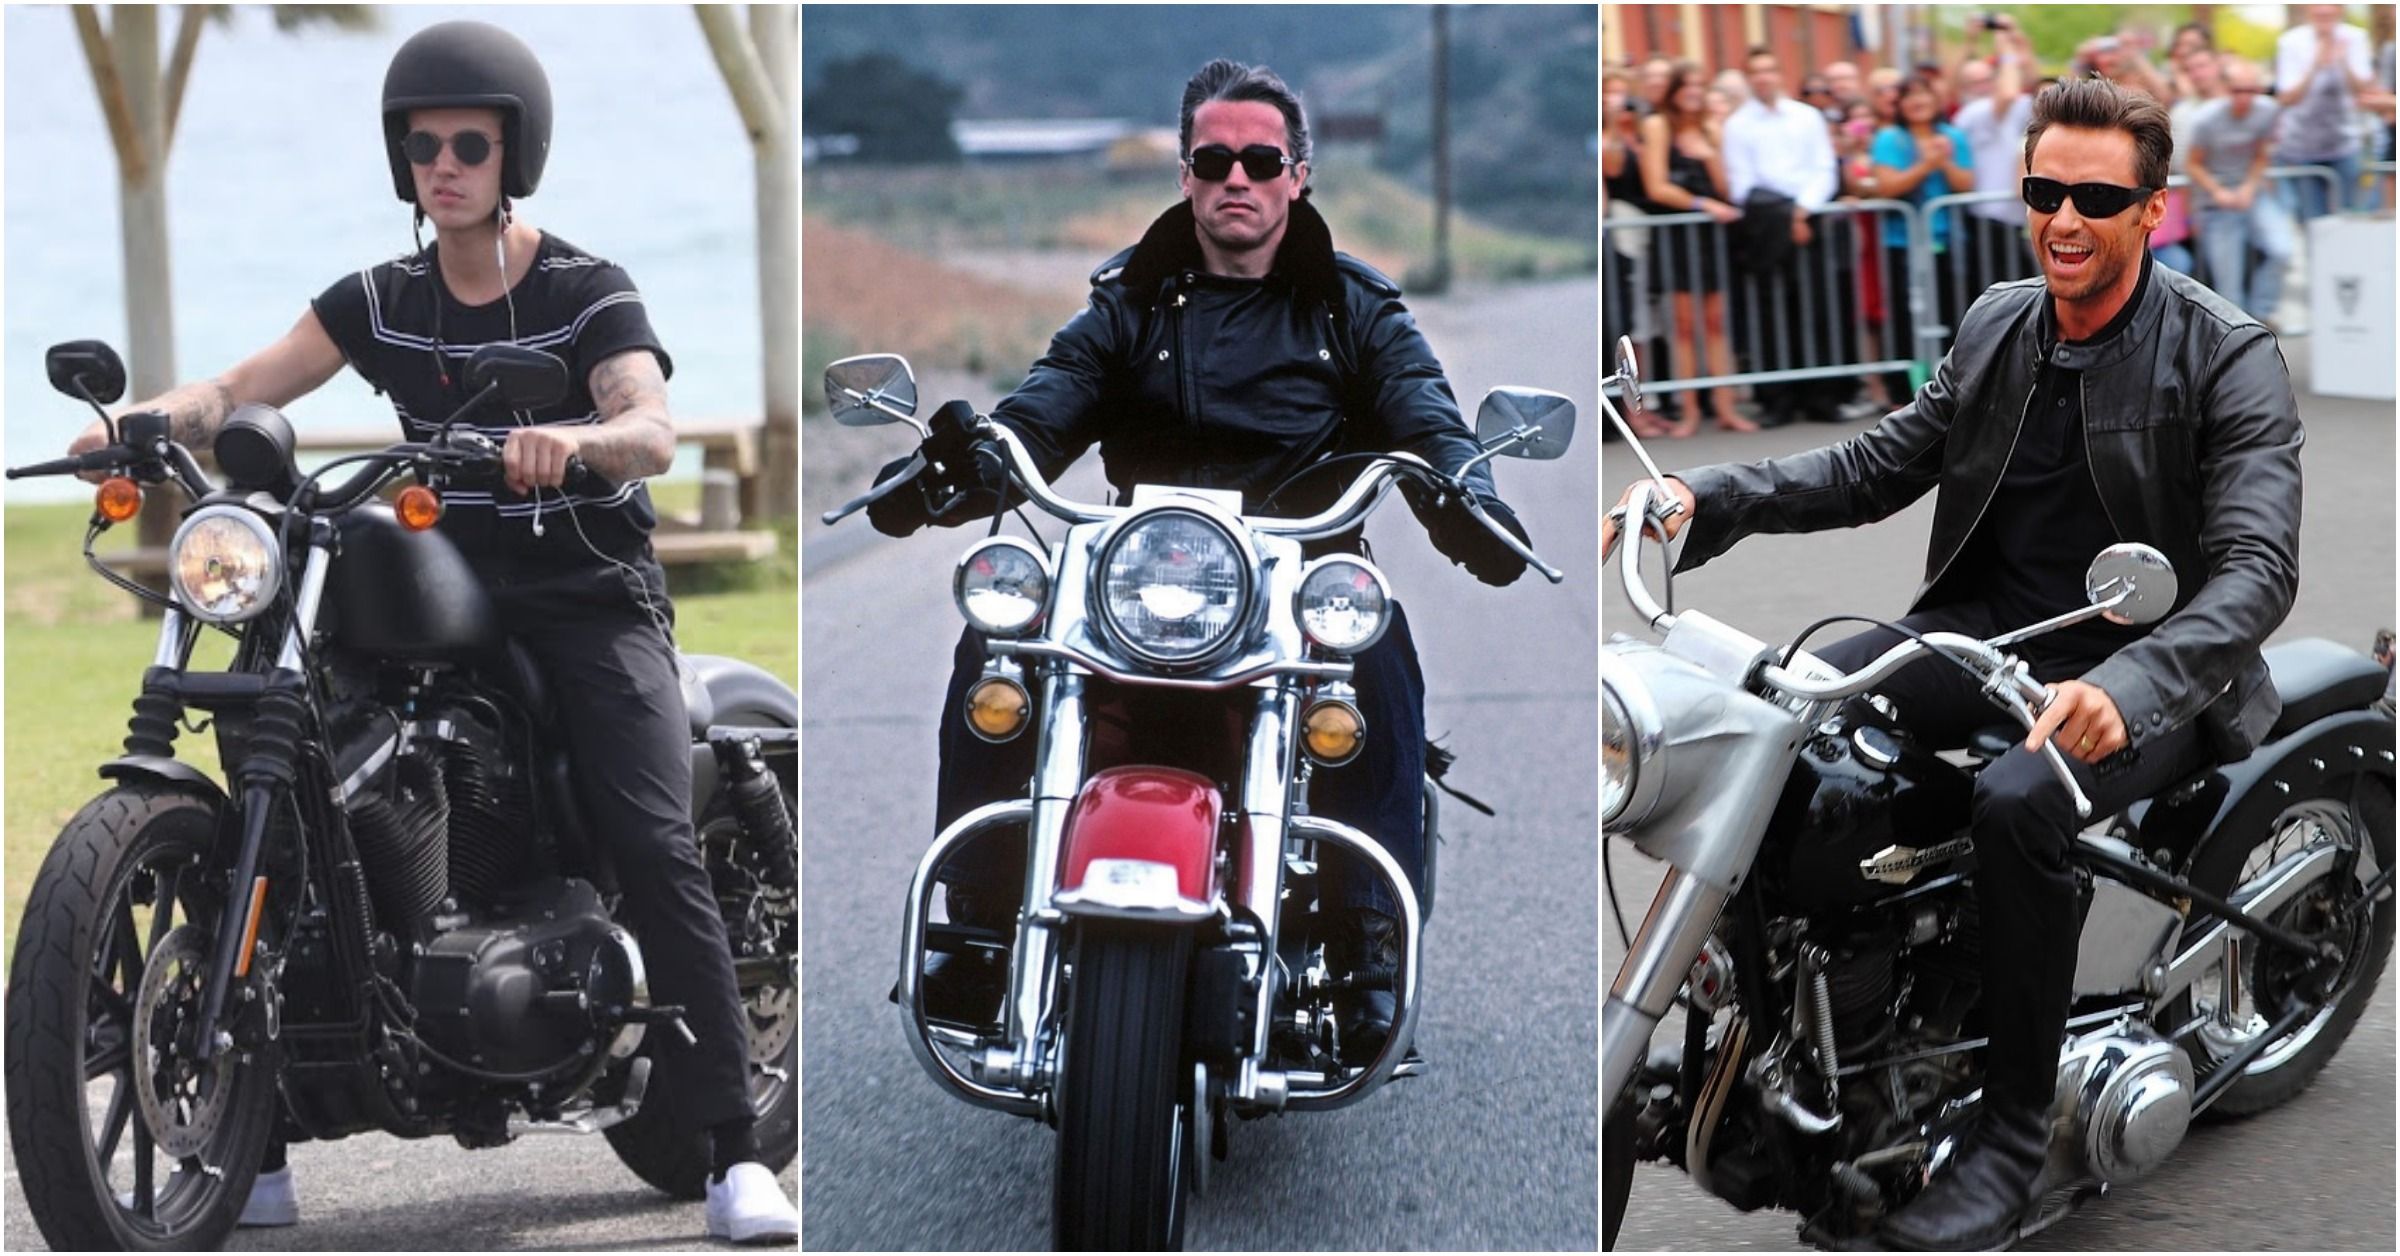 These Celebs Love To Take Their HarleyDavidson Motorcycles Out For A Ride